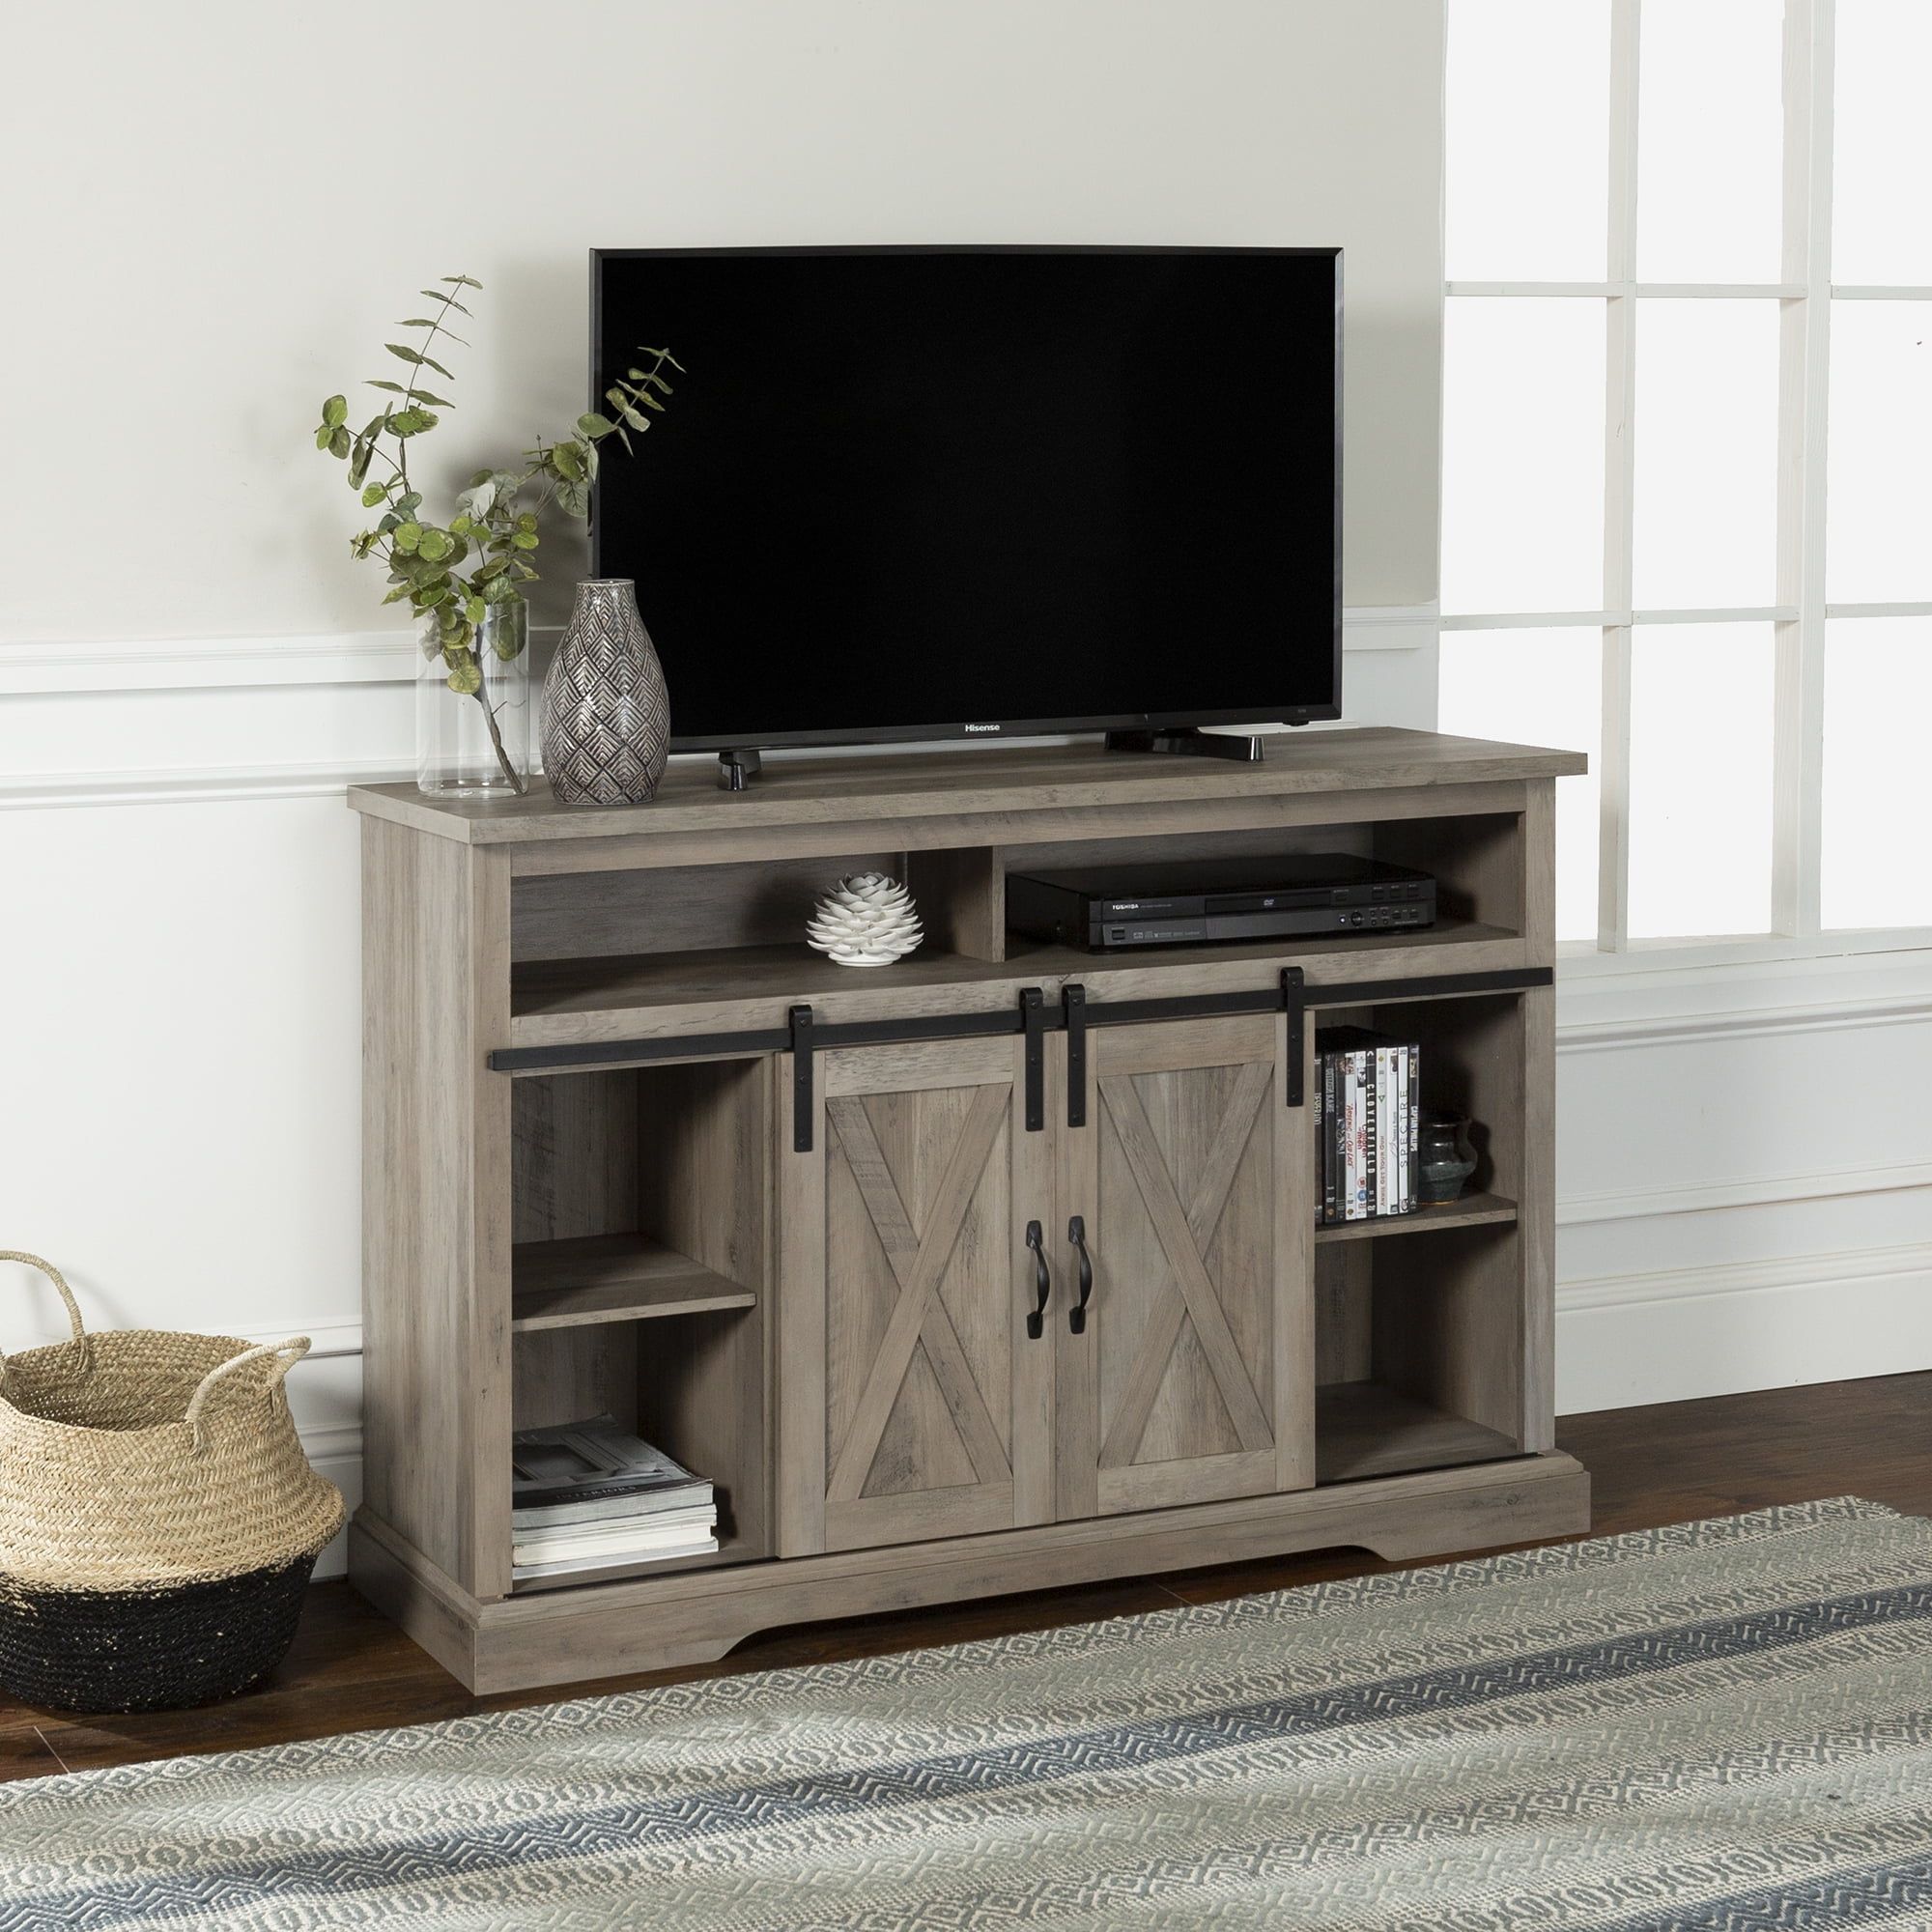 Manor Park Farmhouse Barn Door Tv Stand For Tvs Up To 58", Grey Wash With Regard To Farmhouse Tv Stands (Gallery 17 of 20)